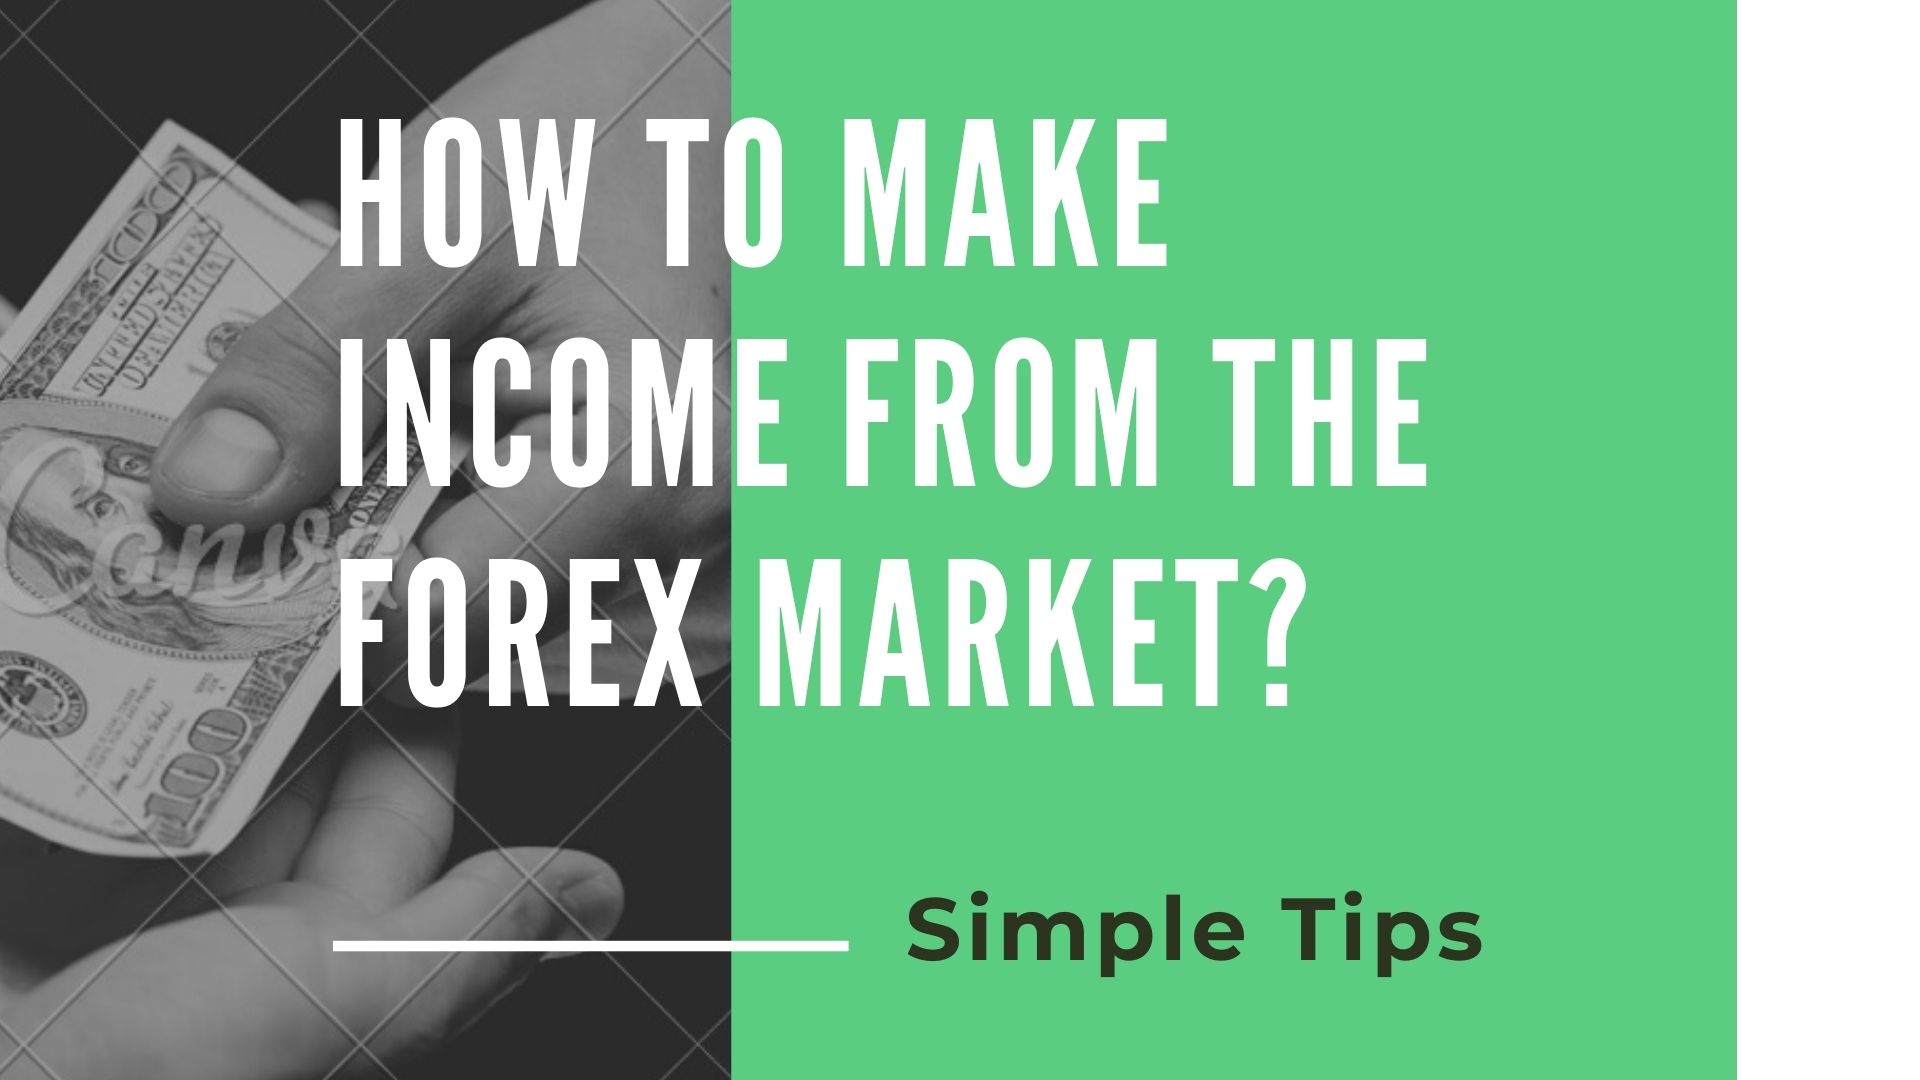 How to Make Income from the Forex Market?